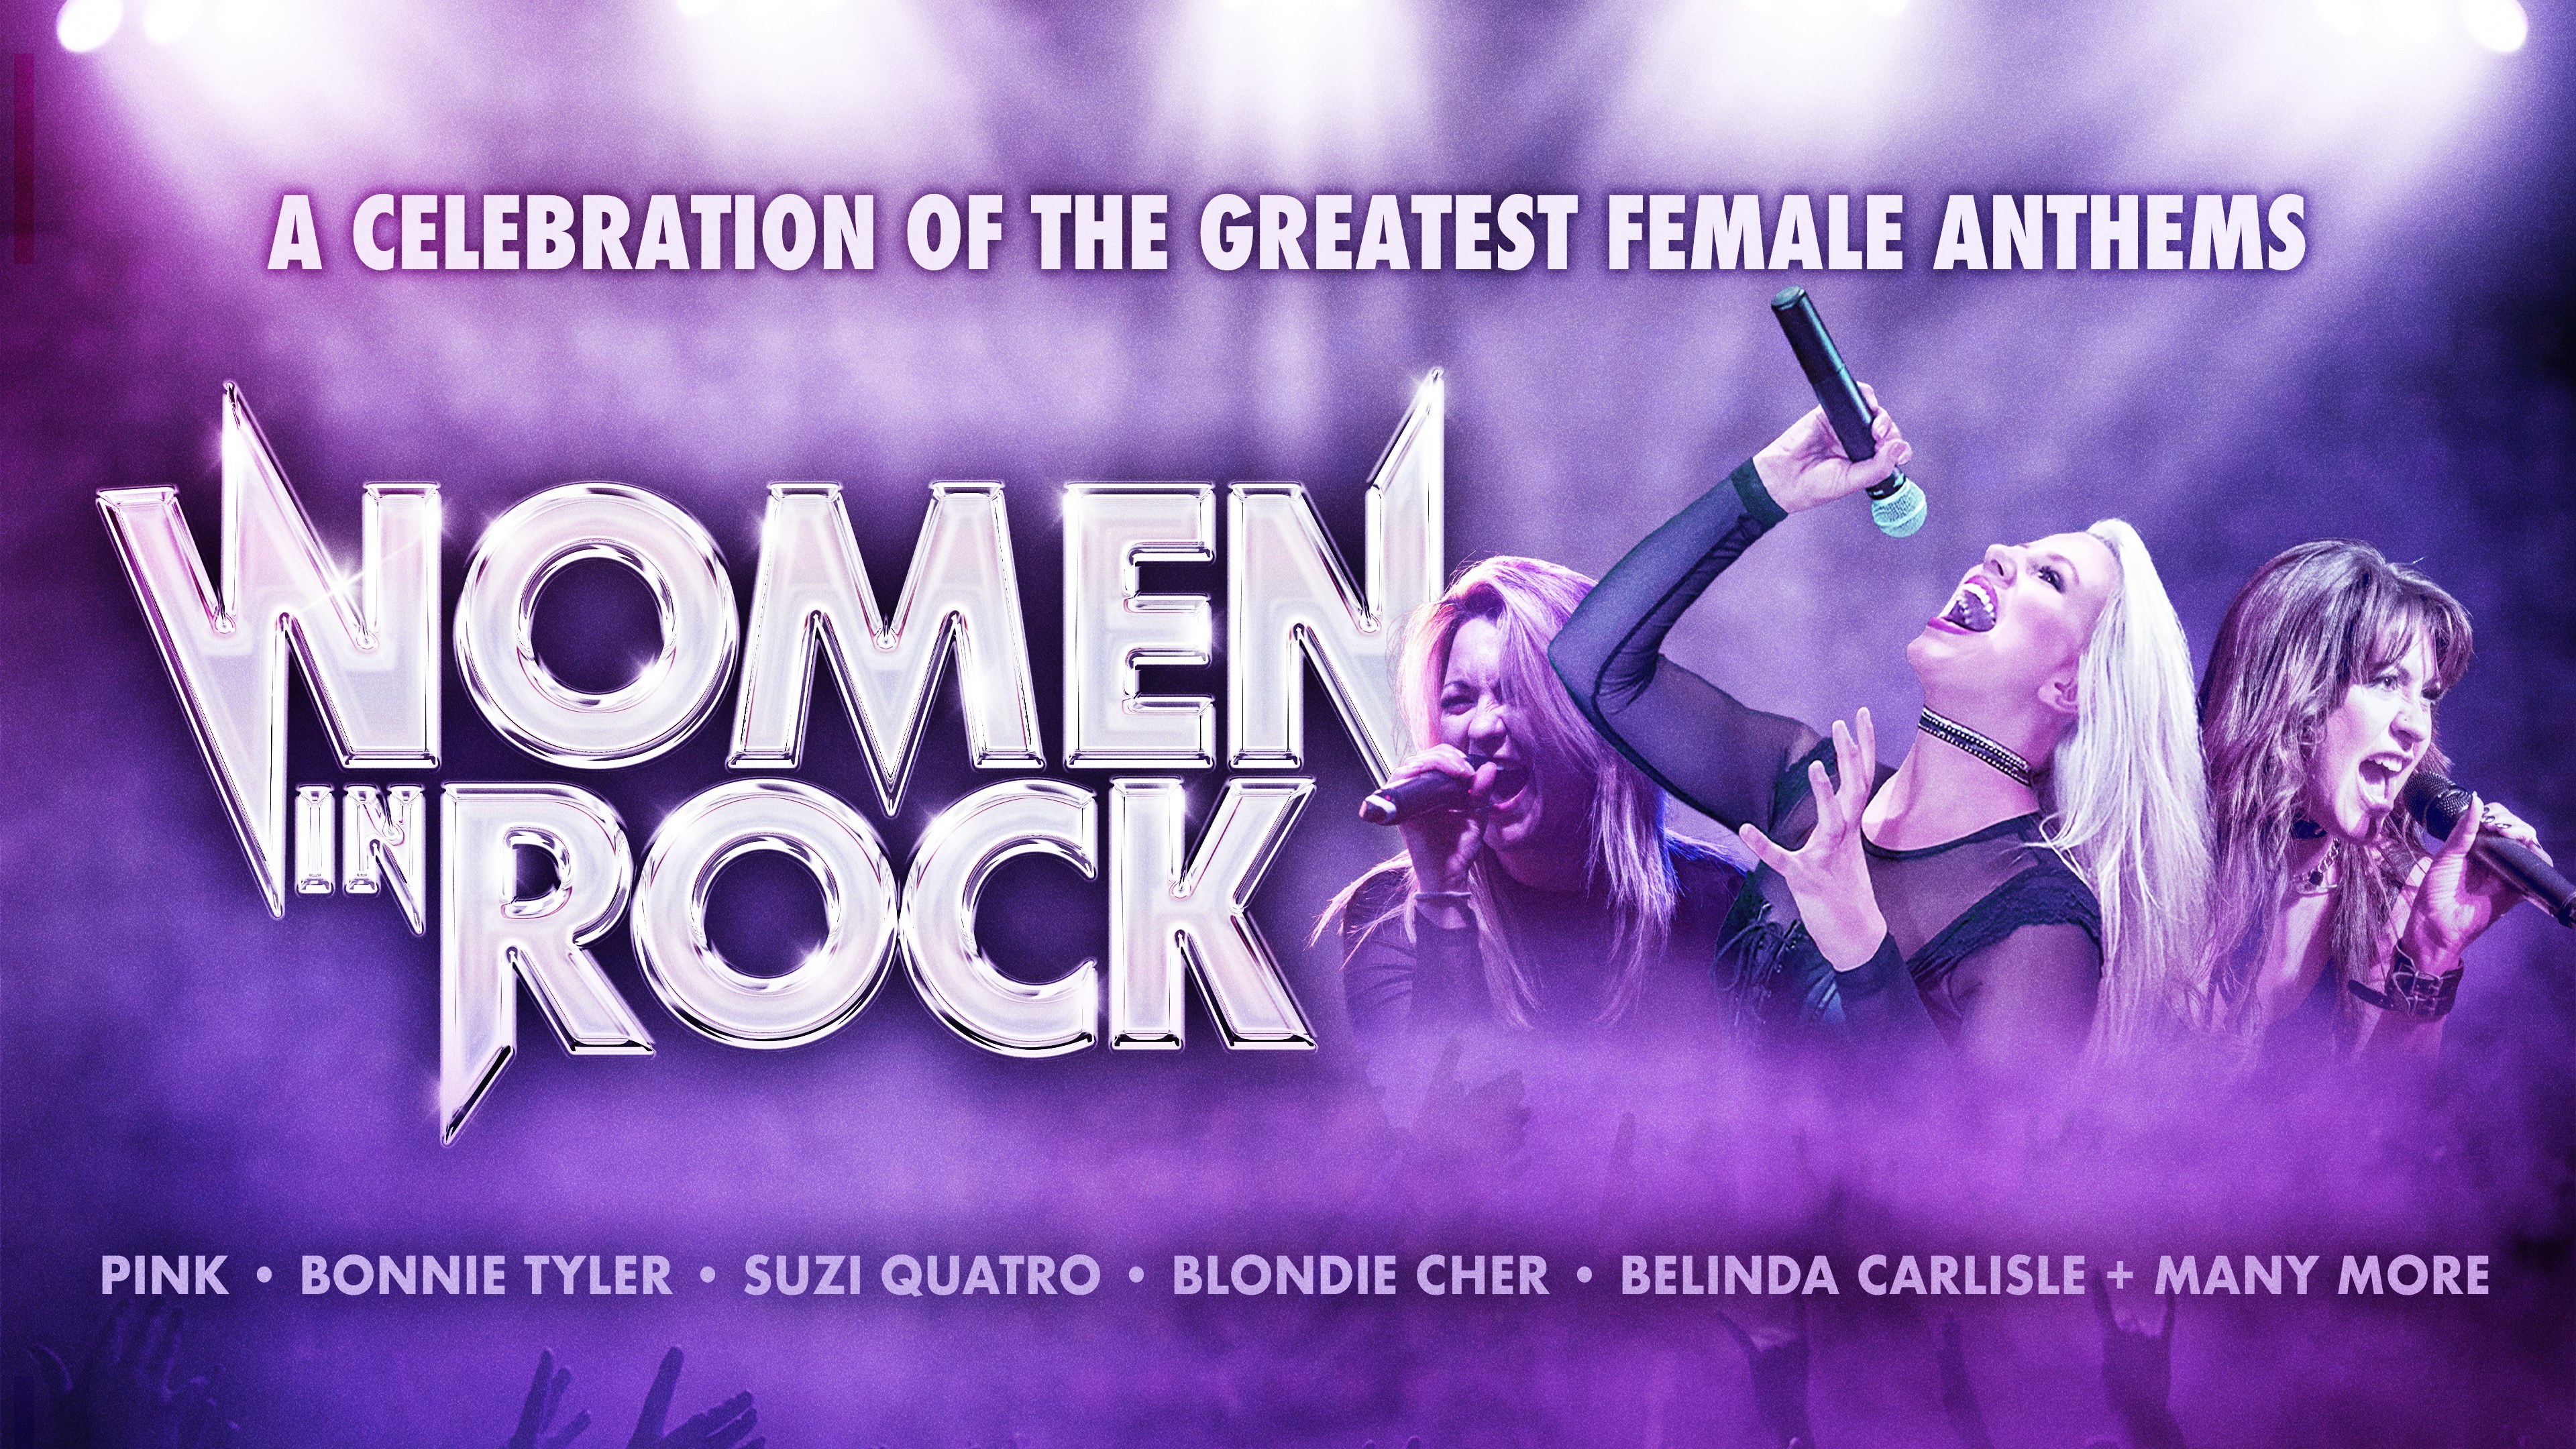 WOMEN IN ROCK - A celebration of the greatest female anthems